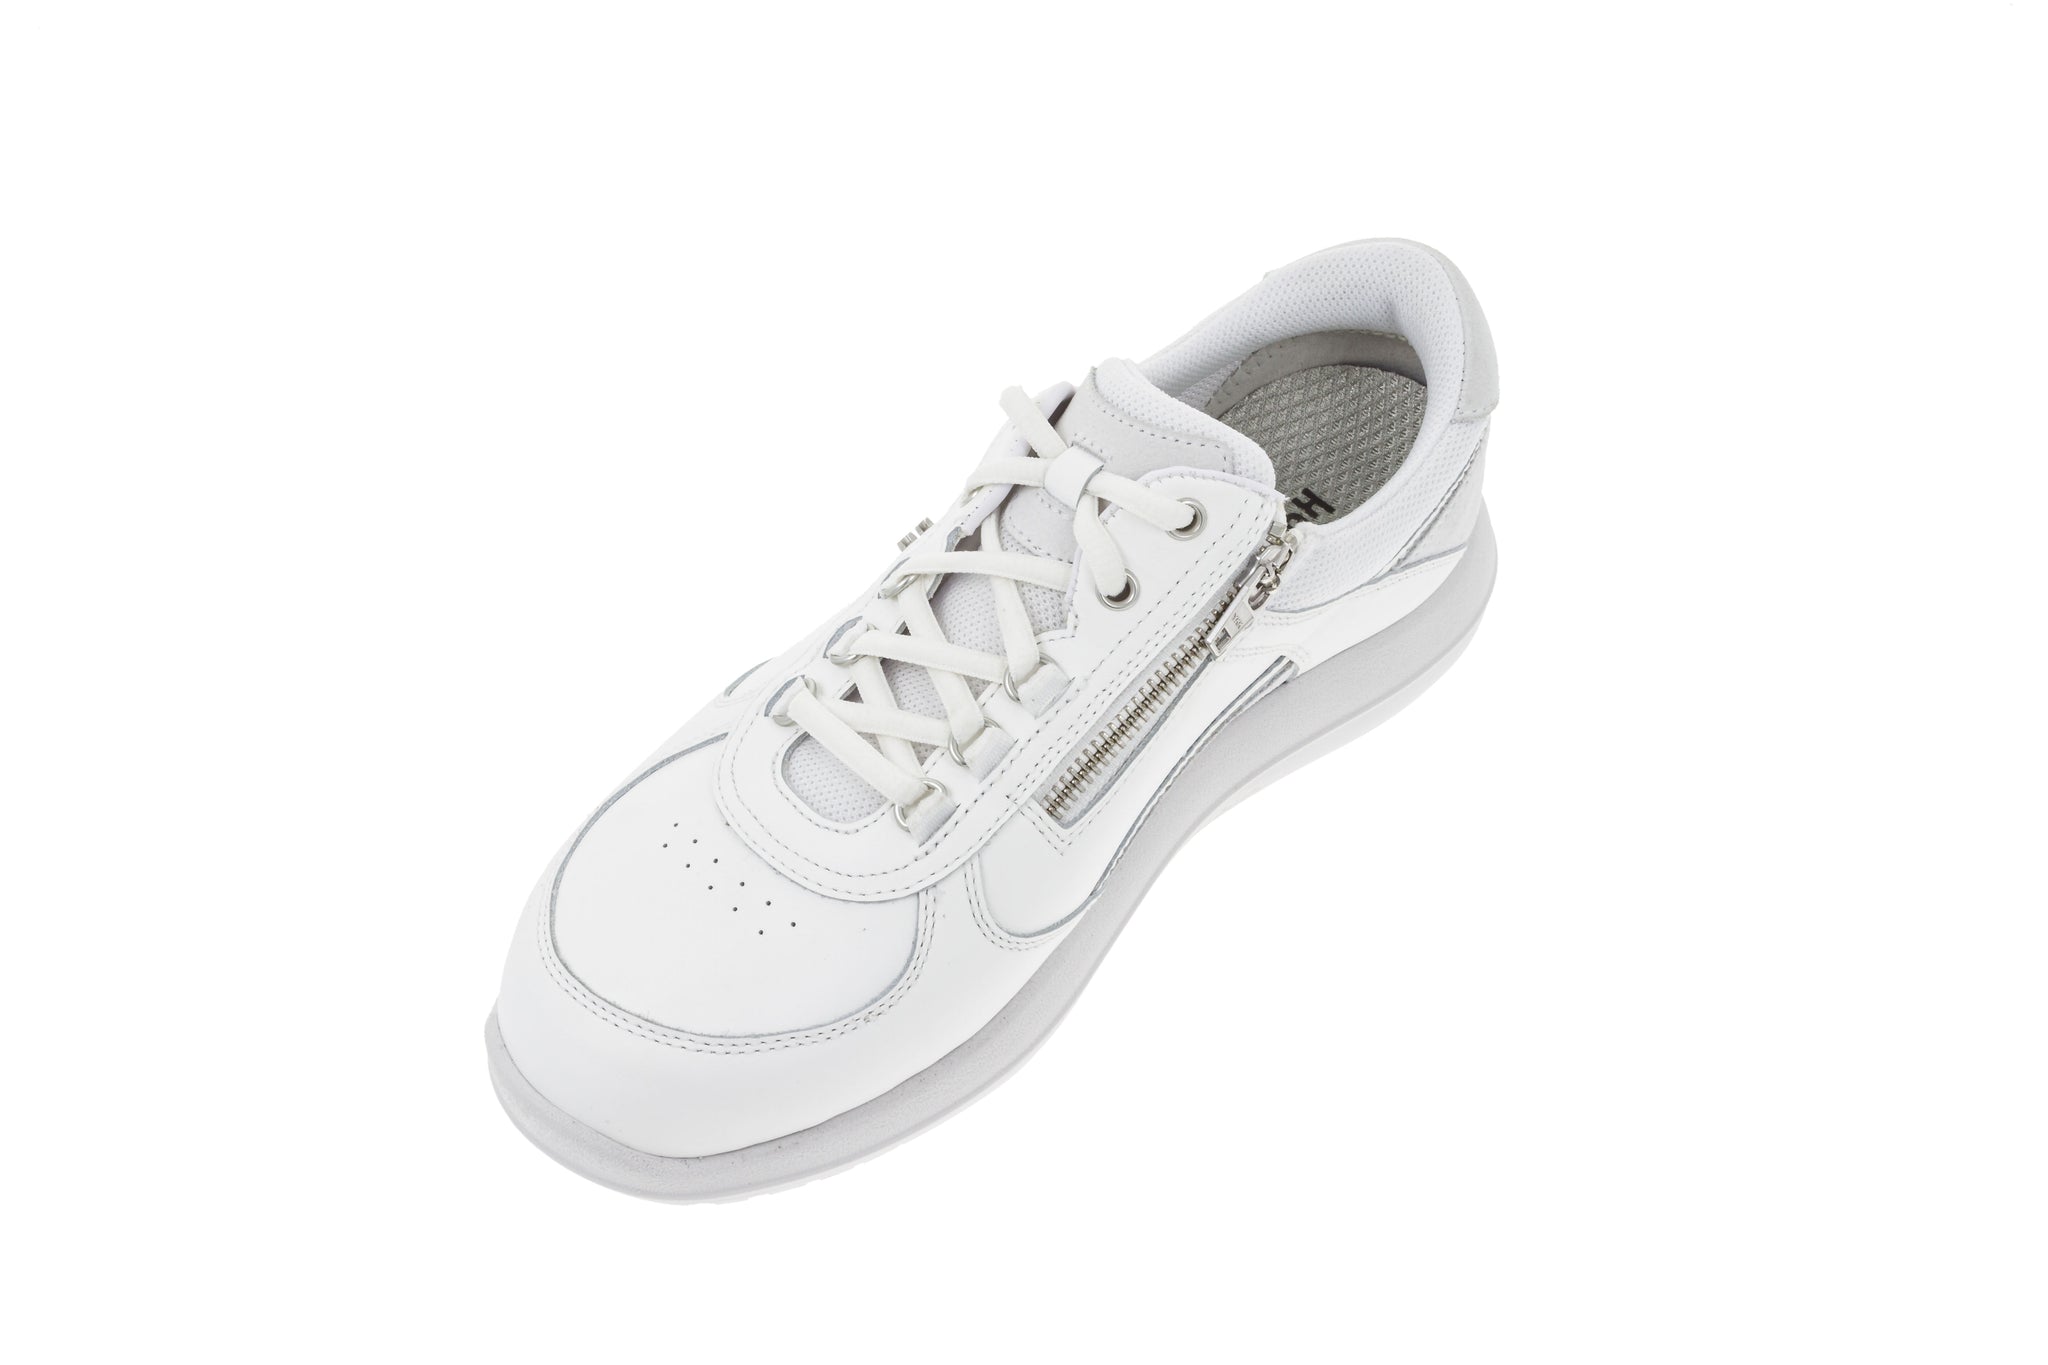 kybun Rolle White: Swiss Air-Cushion store online Shoe Pain kybun USA – for Relief